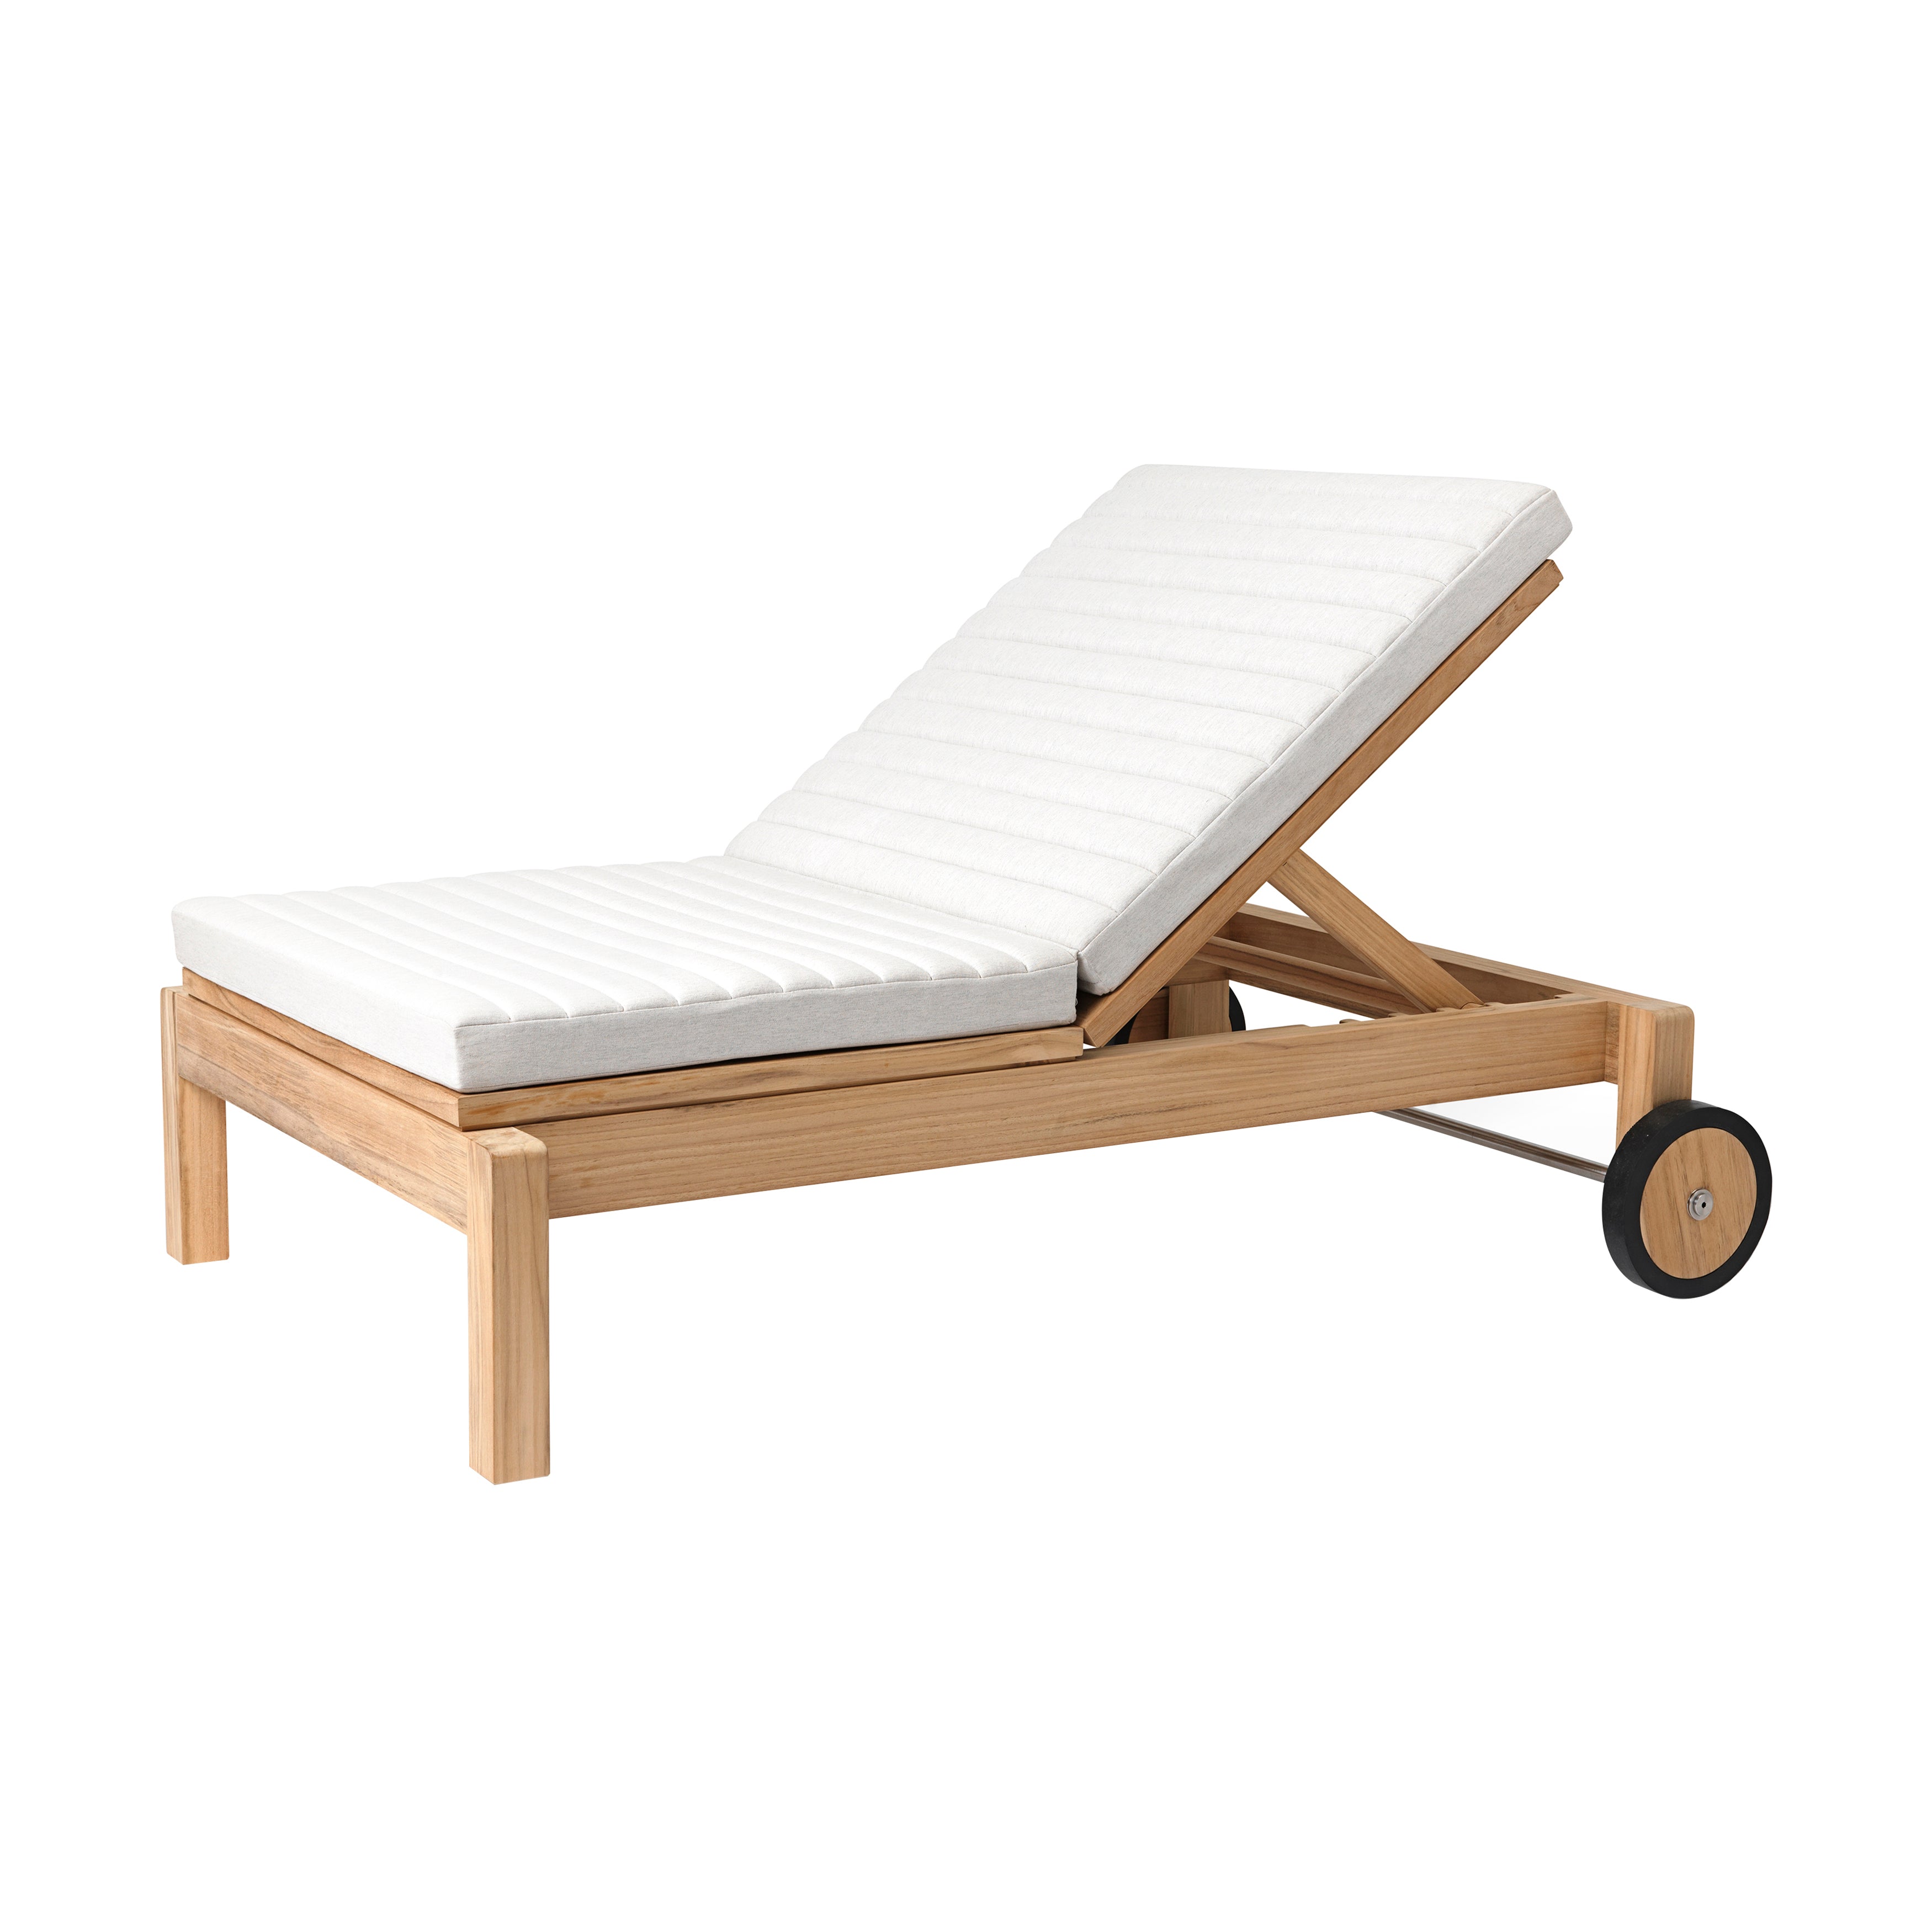 AH604 Outdoor Lounger: With Cushion